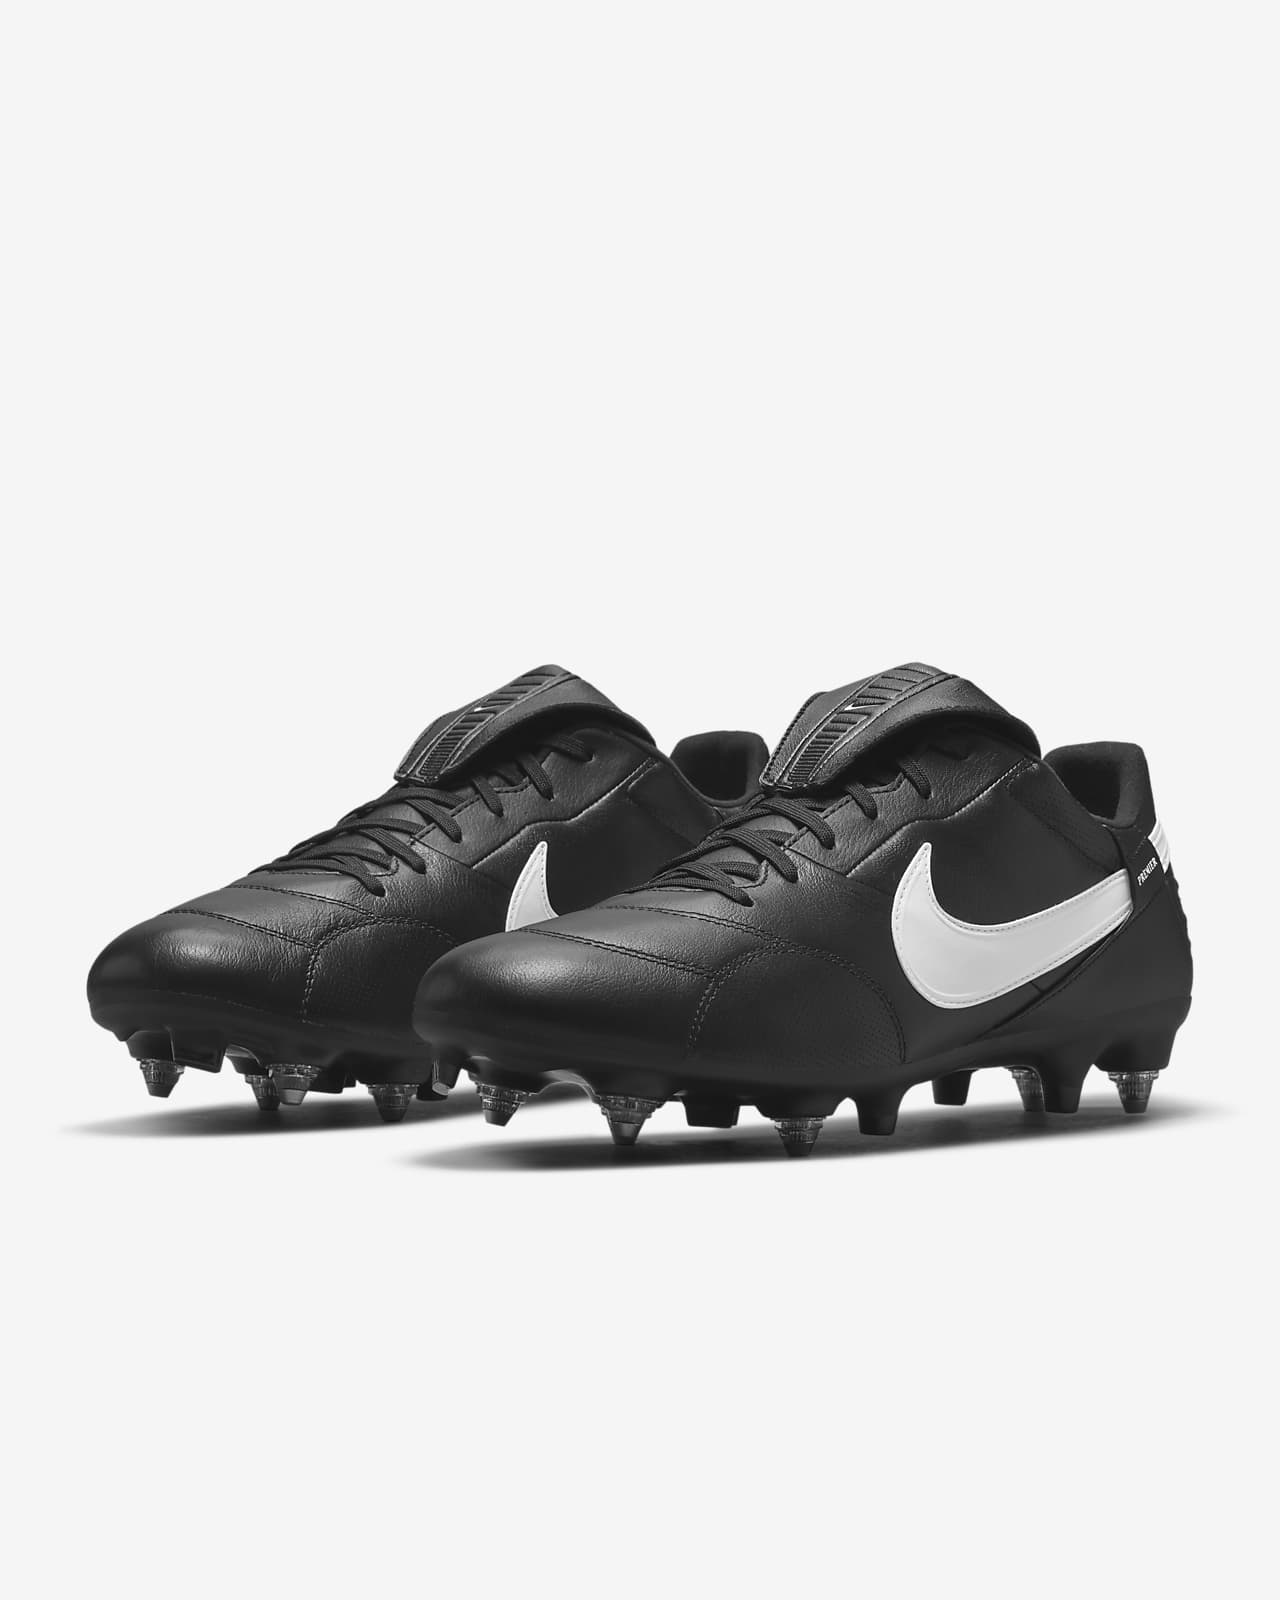 Nike Premier 3 SG-PRO Traction Soft-Ground Boot. Nike